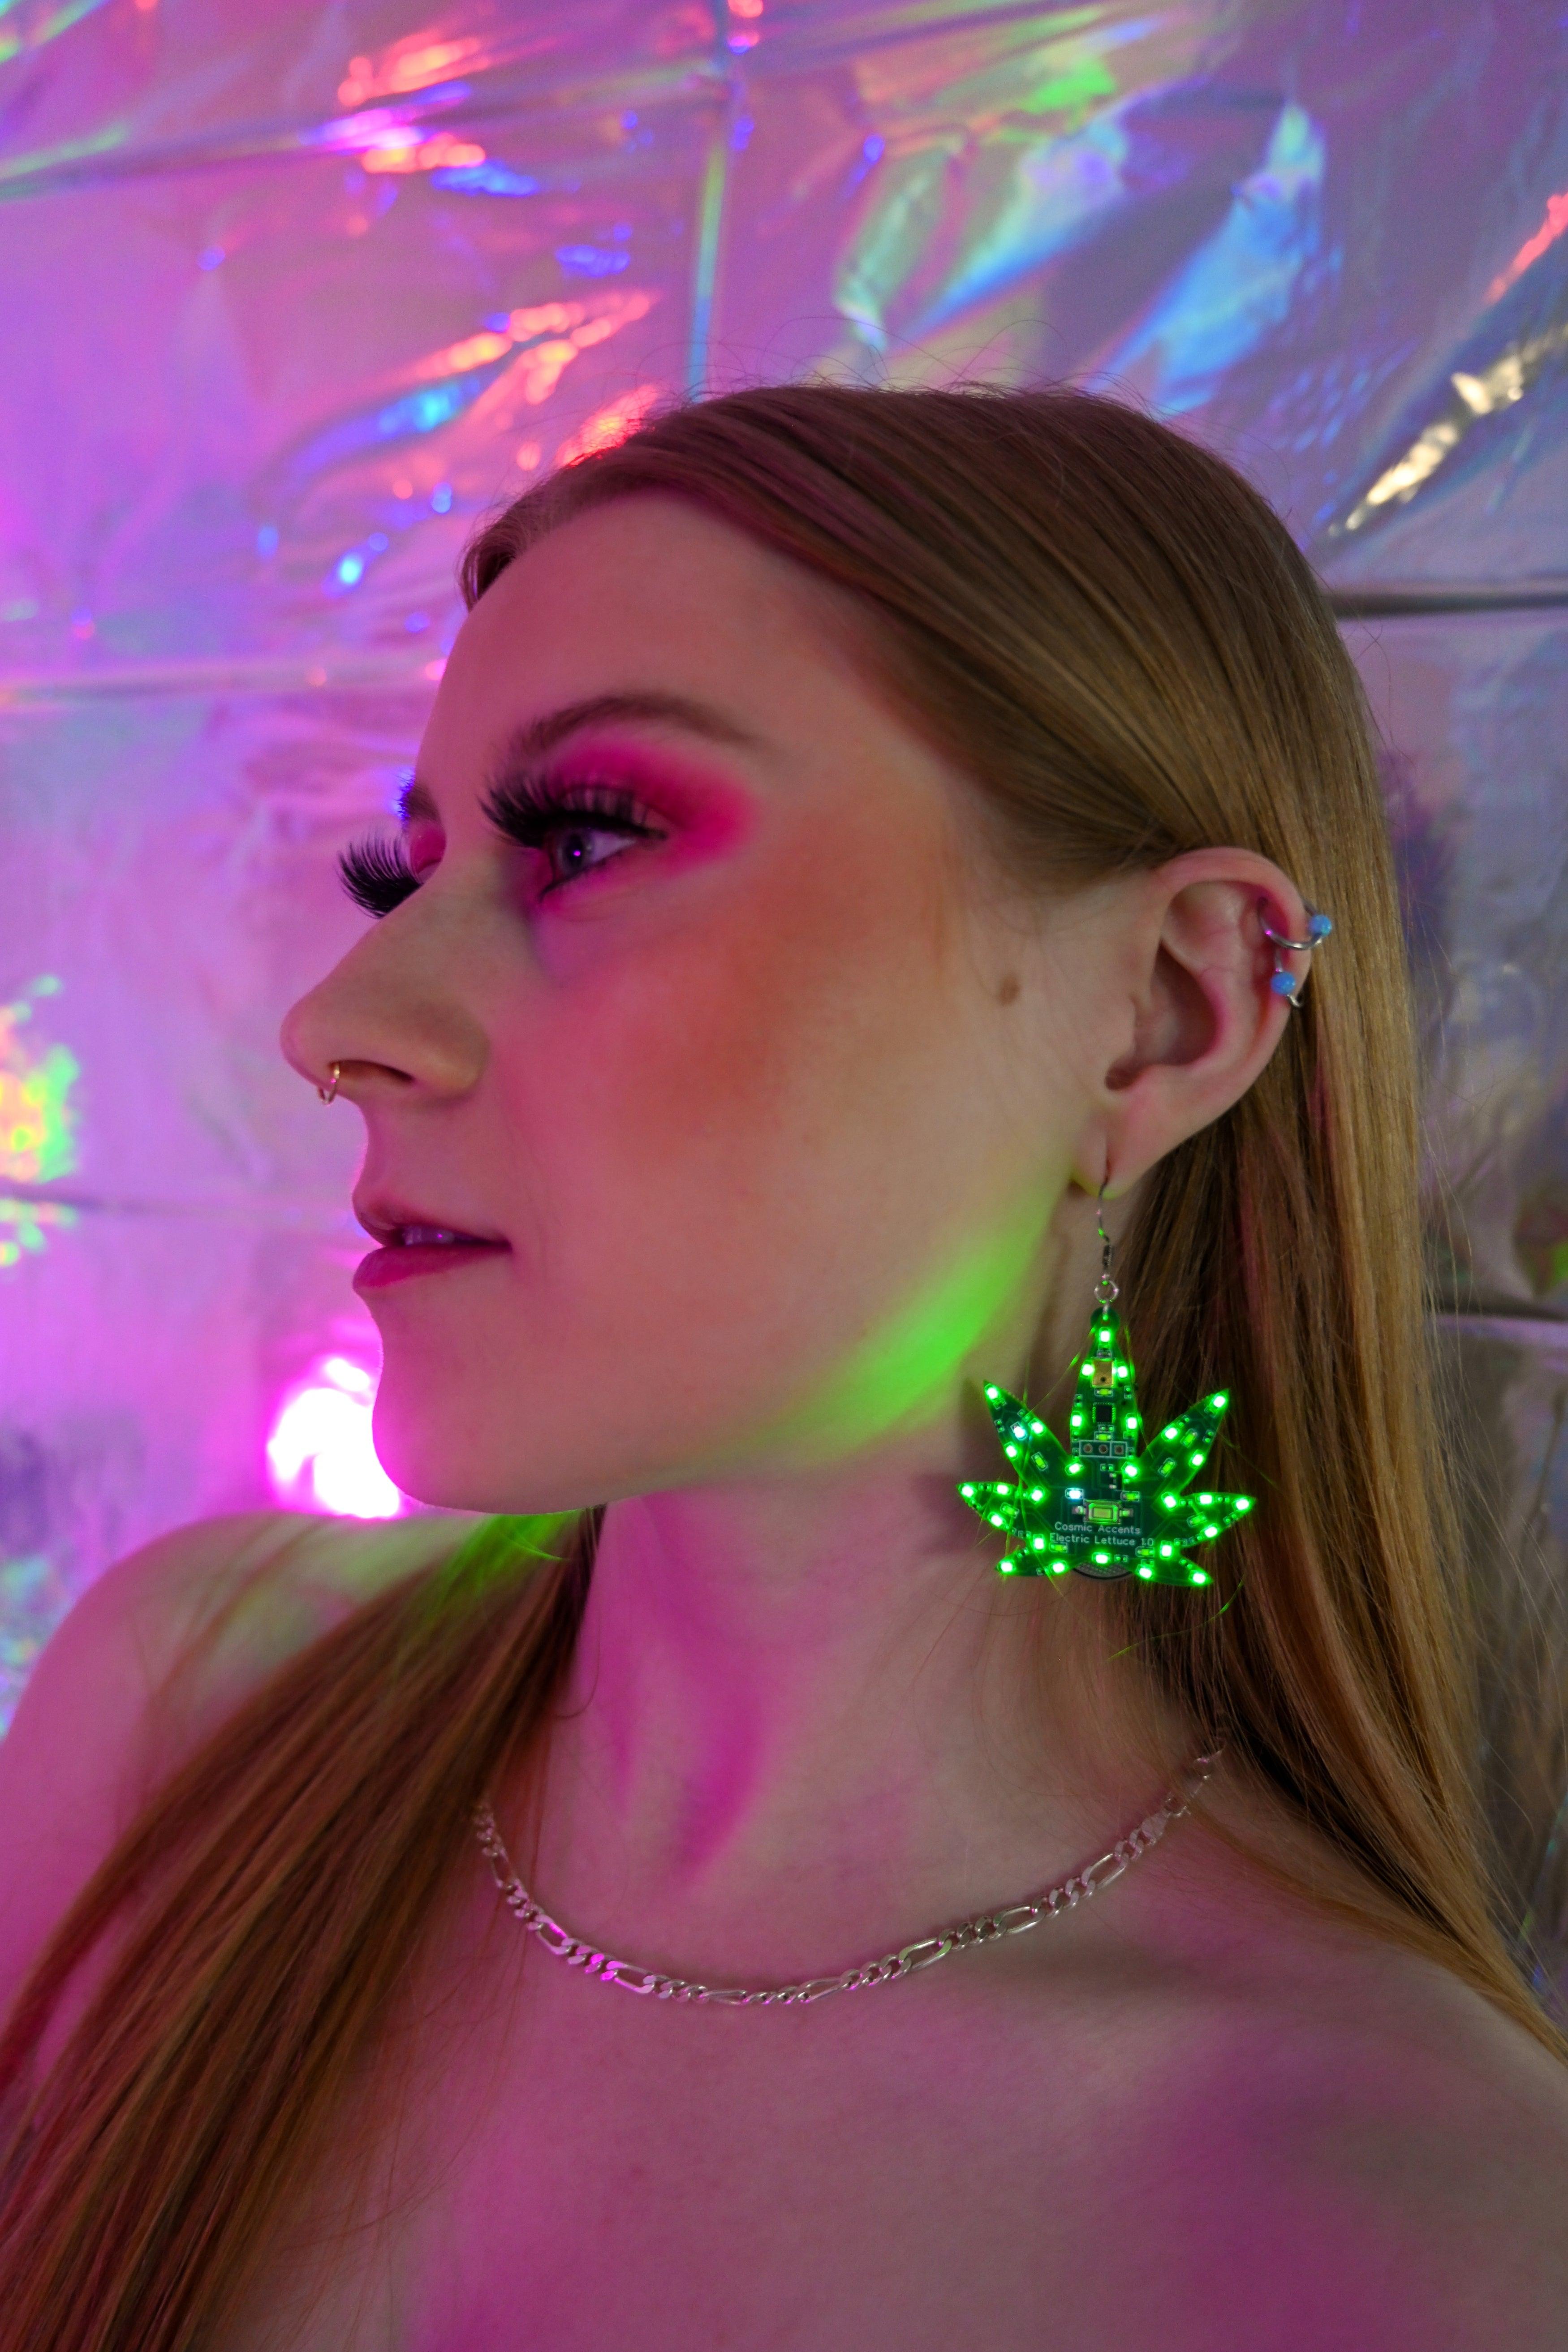 A young woman wearing marijuana-shaped LED earrings and a simple necklace.